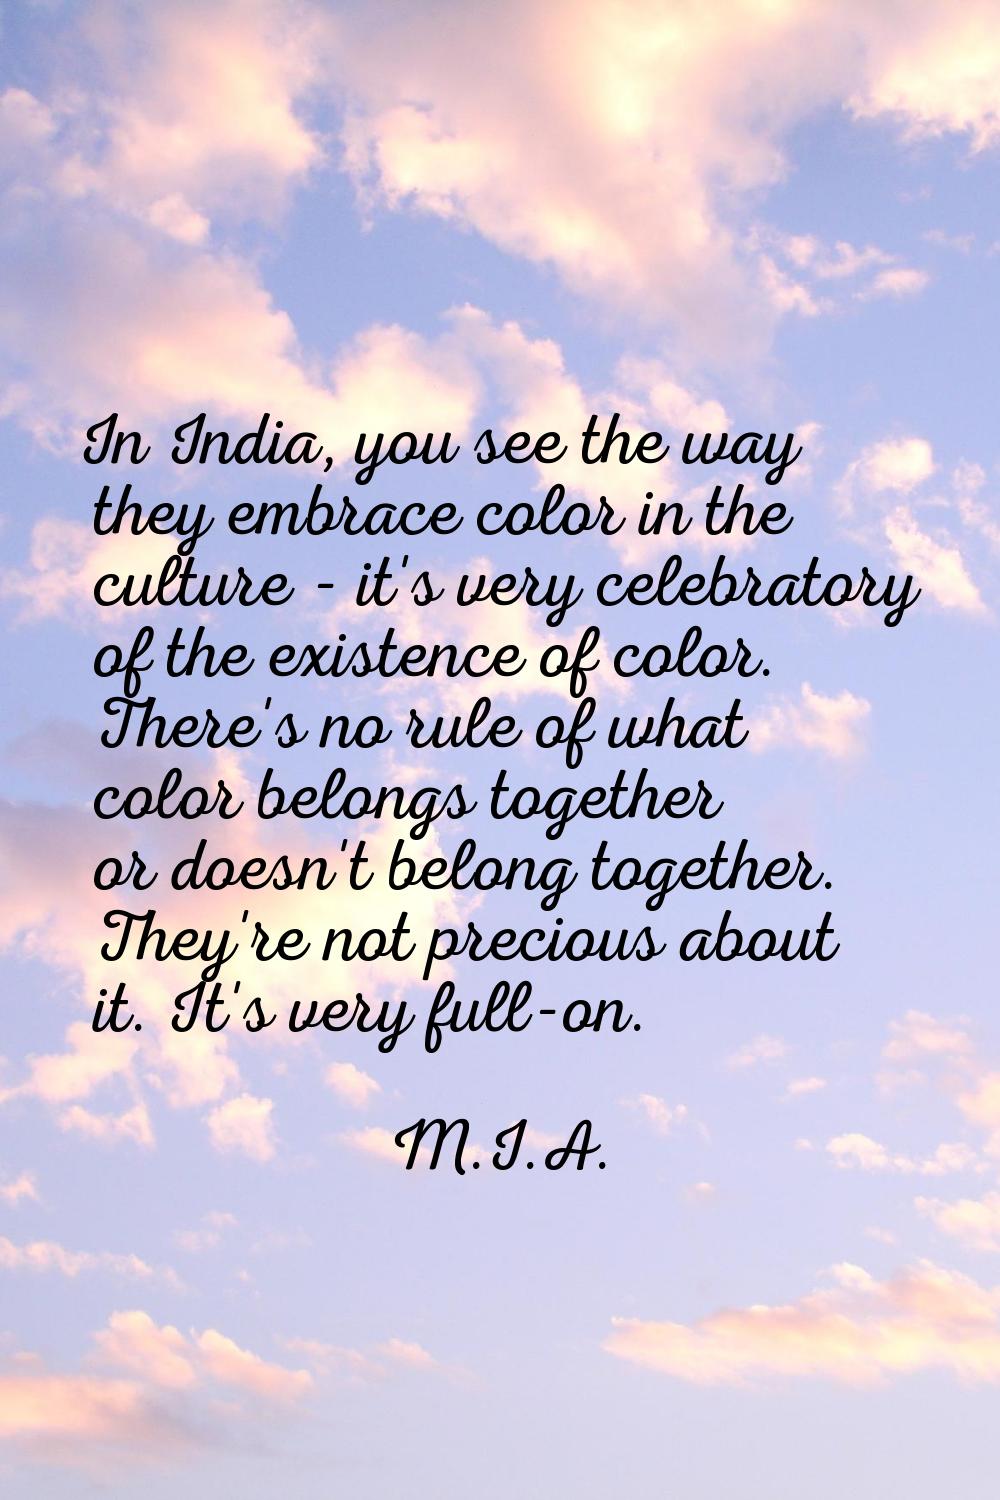 In India, you see the way they embrace color in the culture - it's very celebratory of the existenc